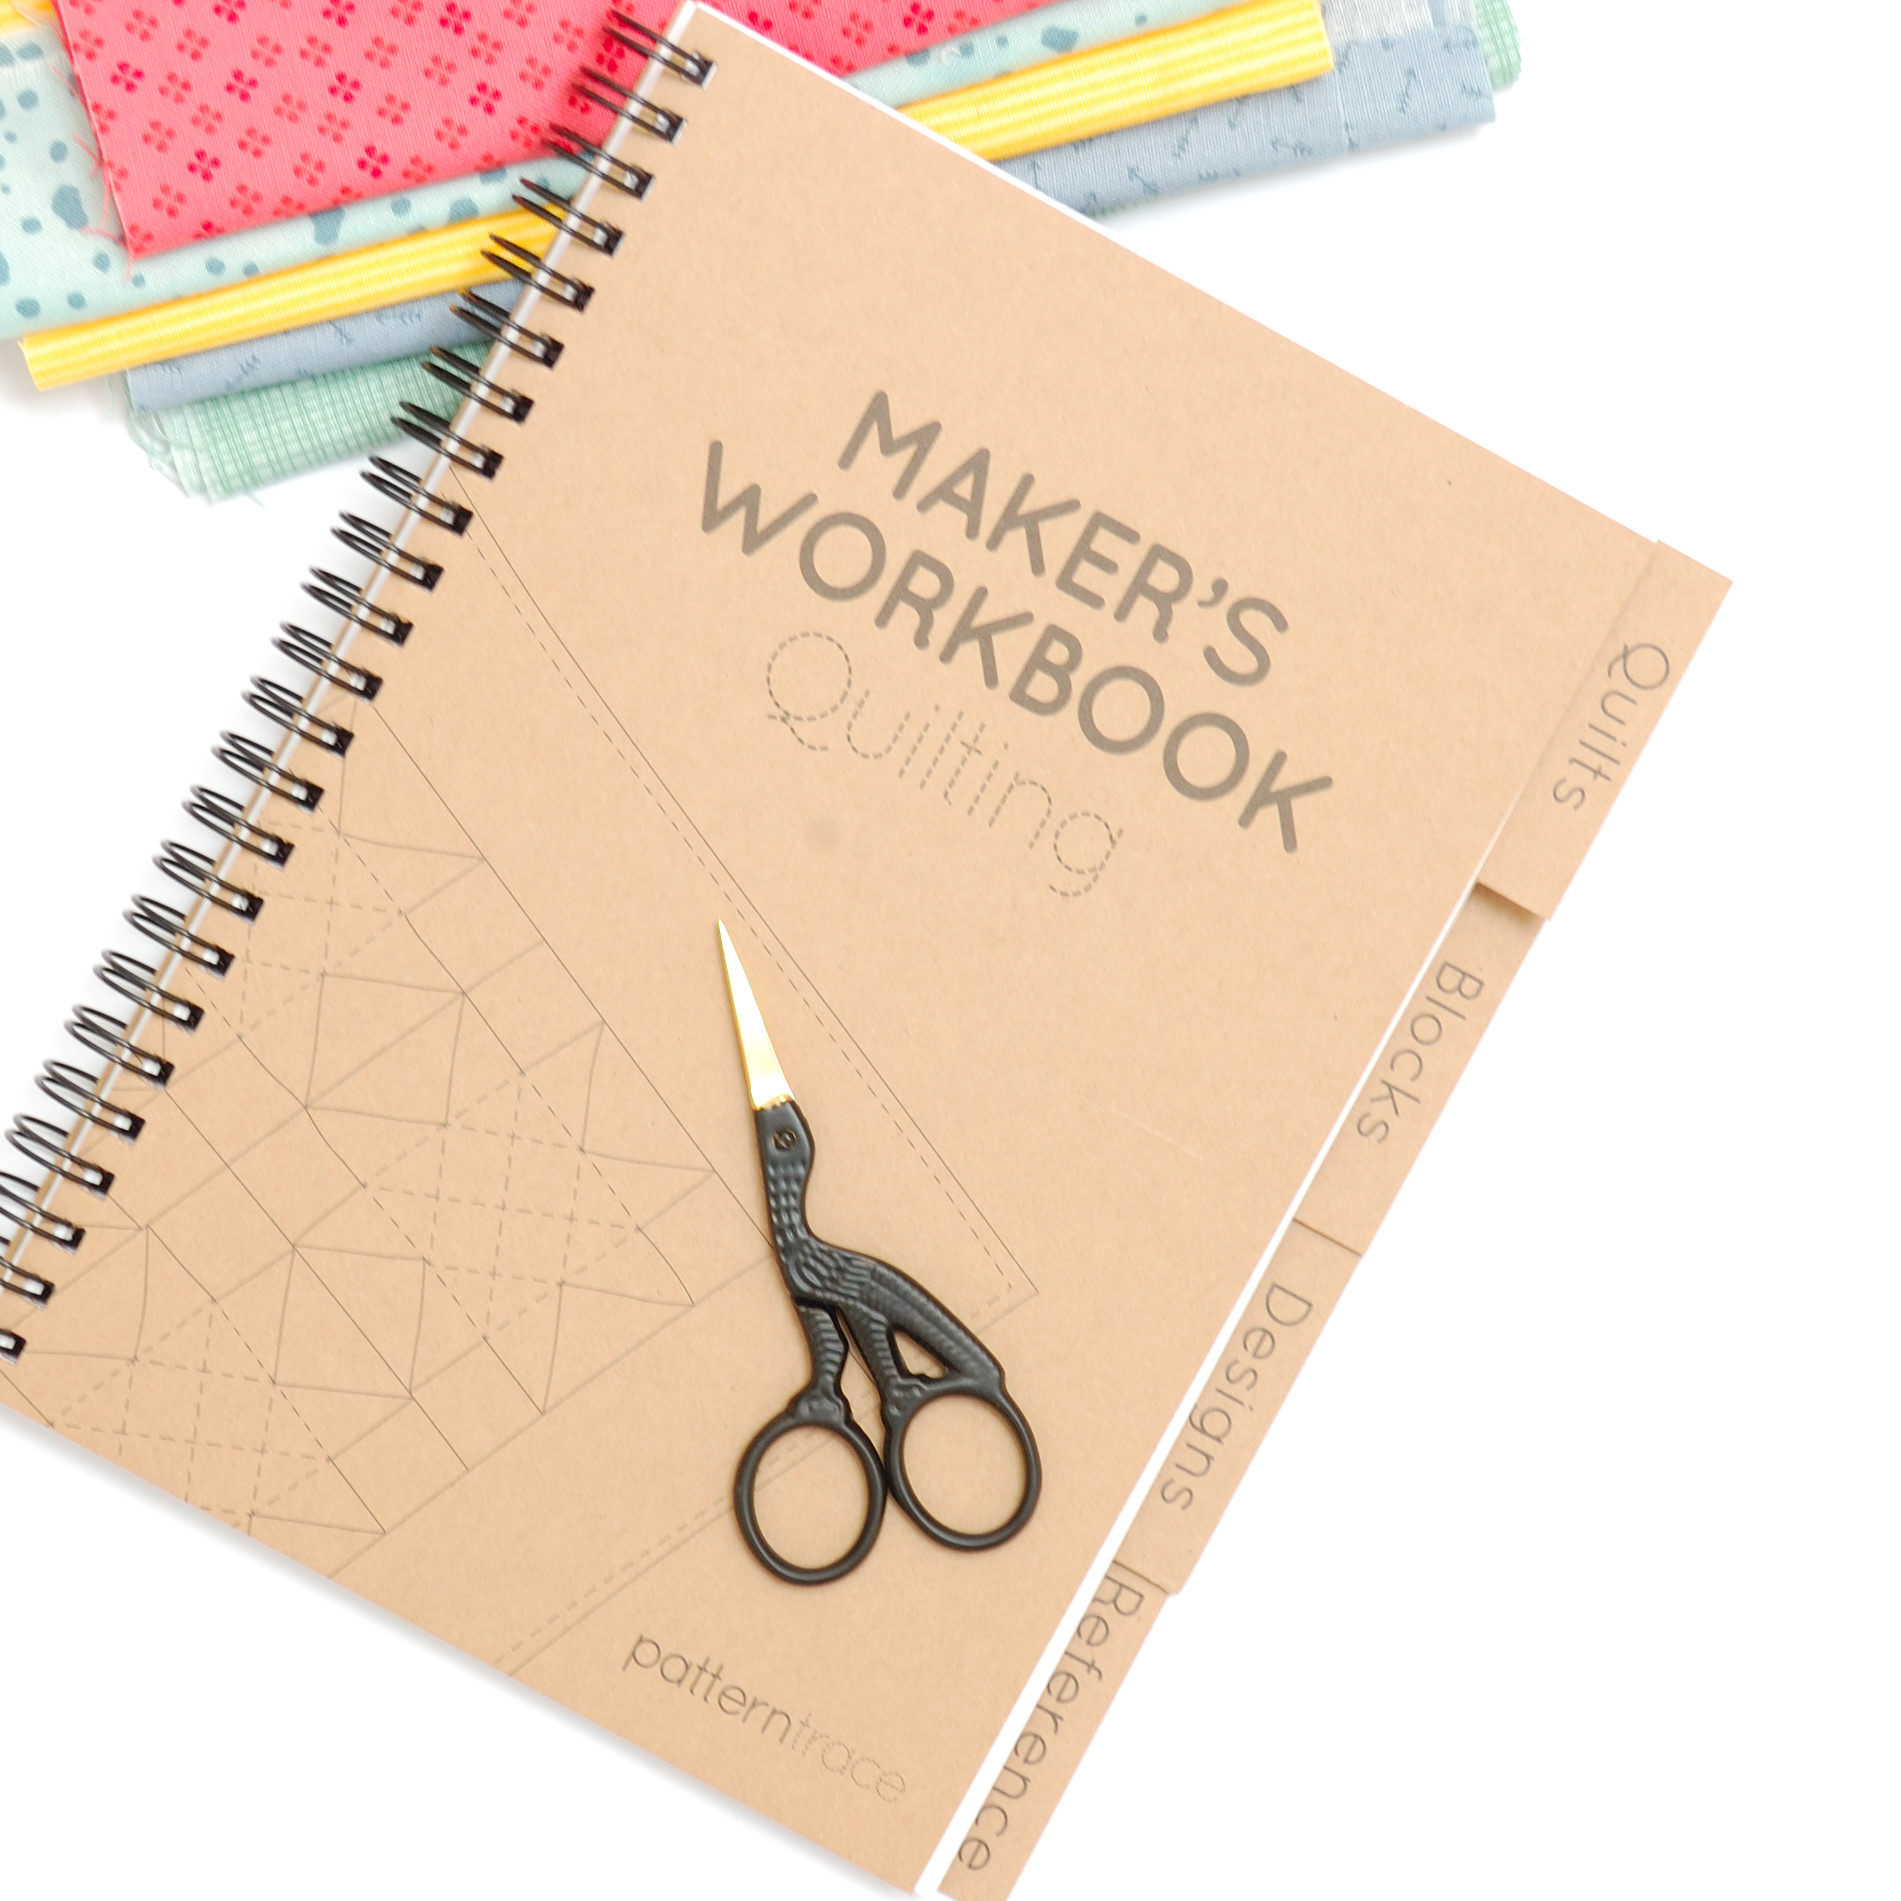 Makers' Workbook -Quilting - PatternTrace